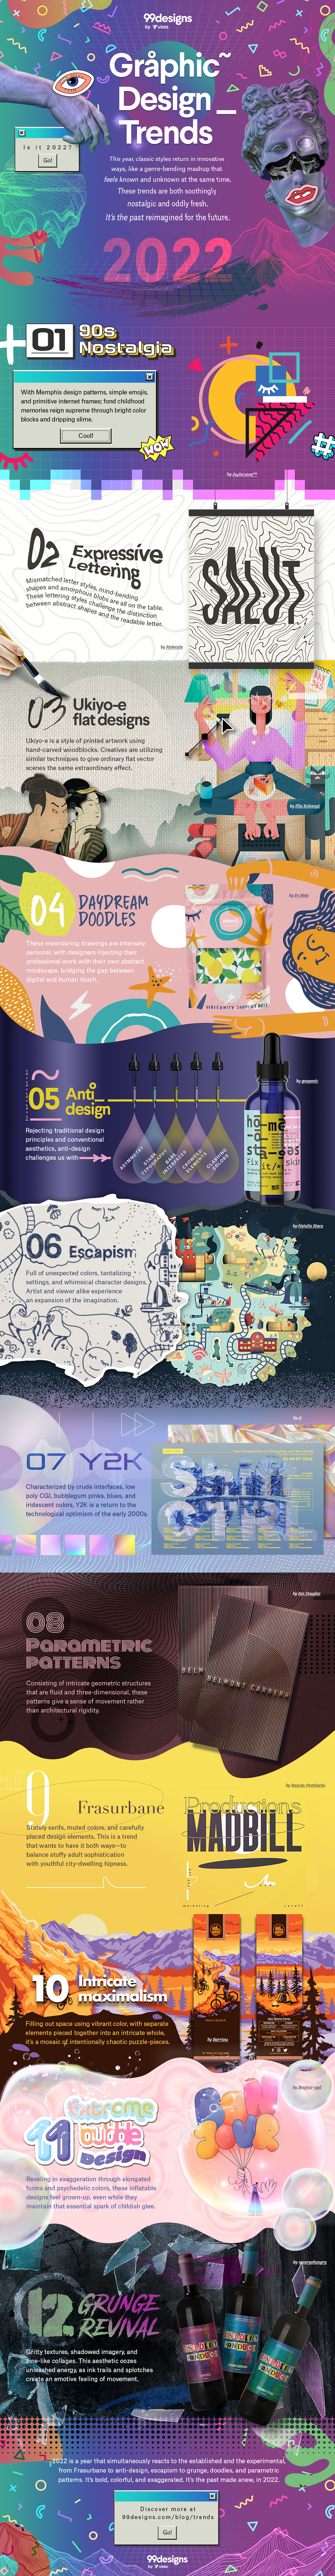 12 graphic design trends to watch in 2022 infographic